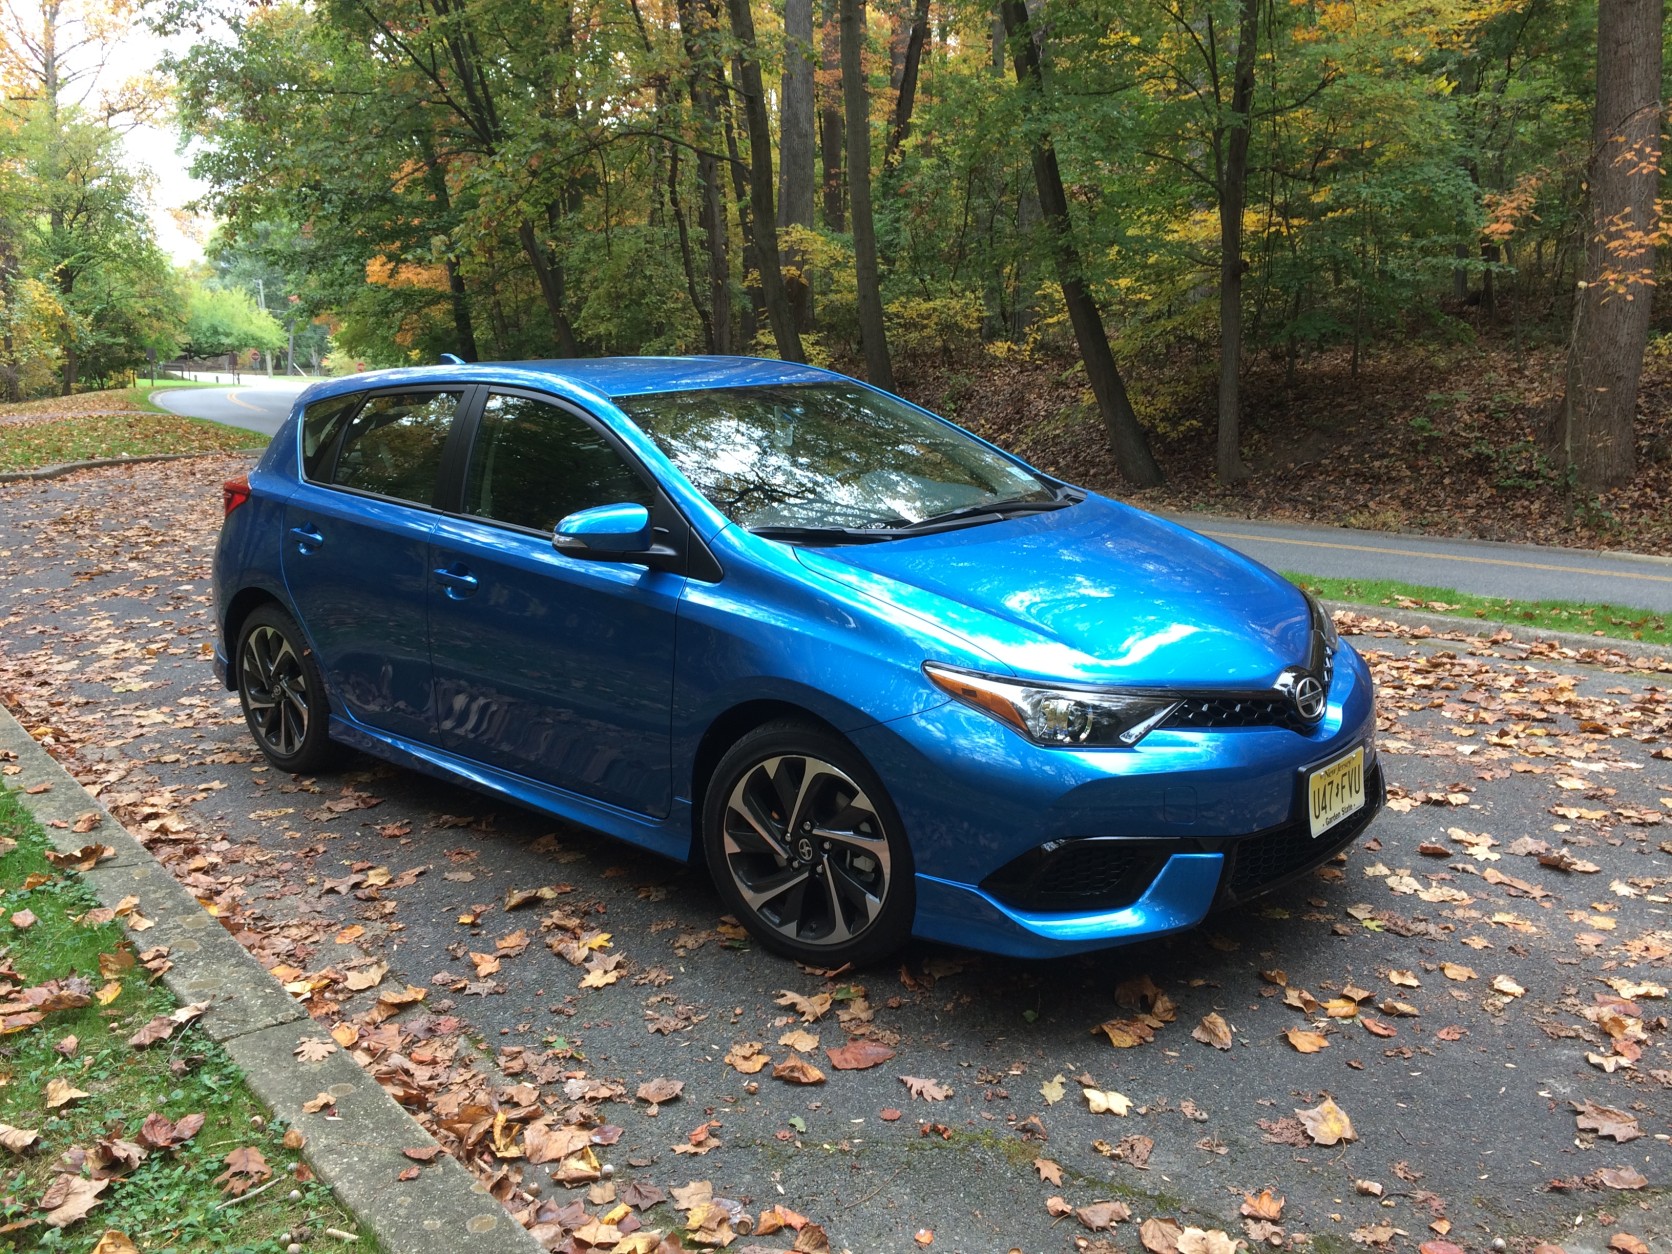 Aimed at first-time car buyers, the 2016 Scion iM is a compact five-door hatch, helping keep the Scion brand relevant with a useful layout. (WTOP/Mike Parris)